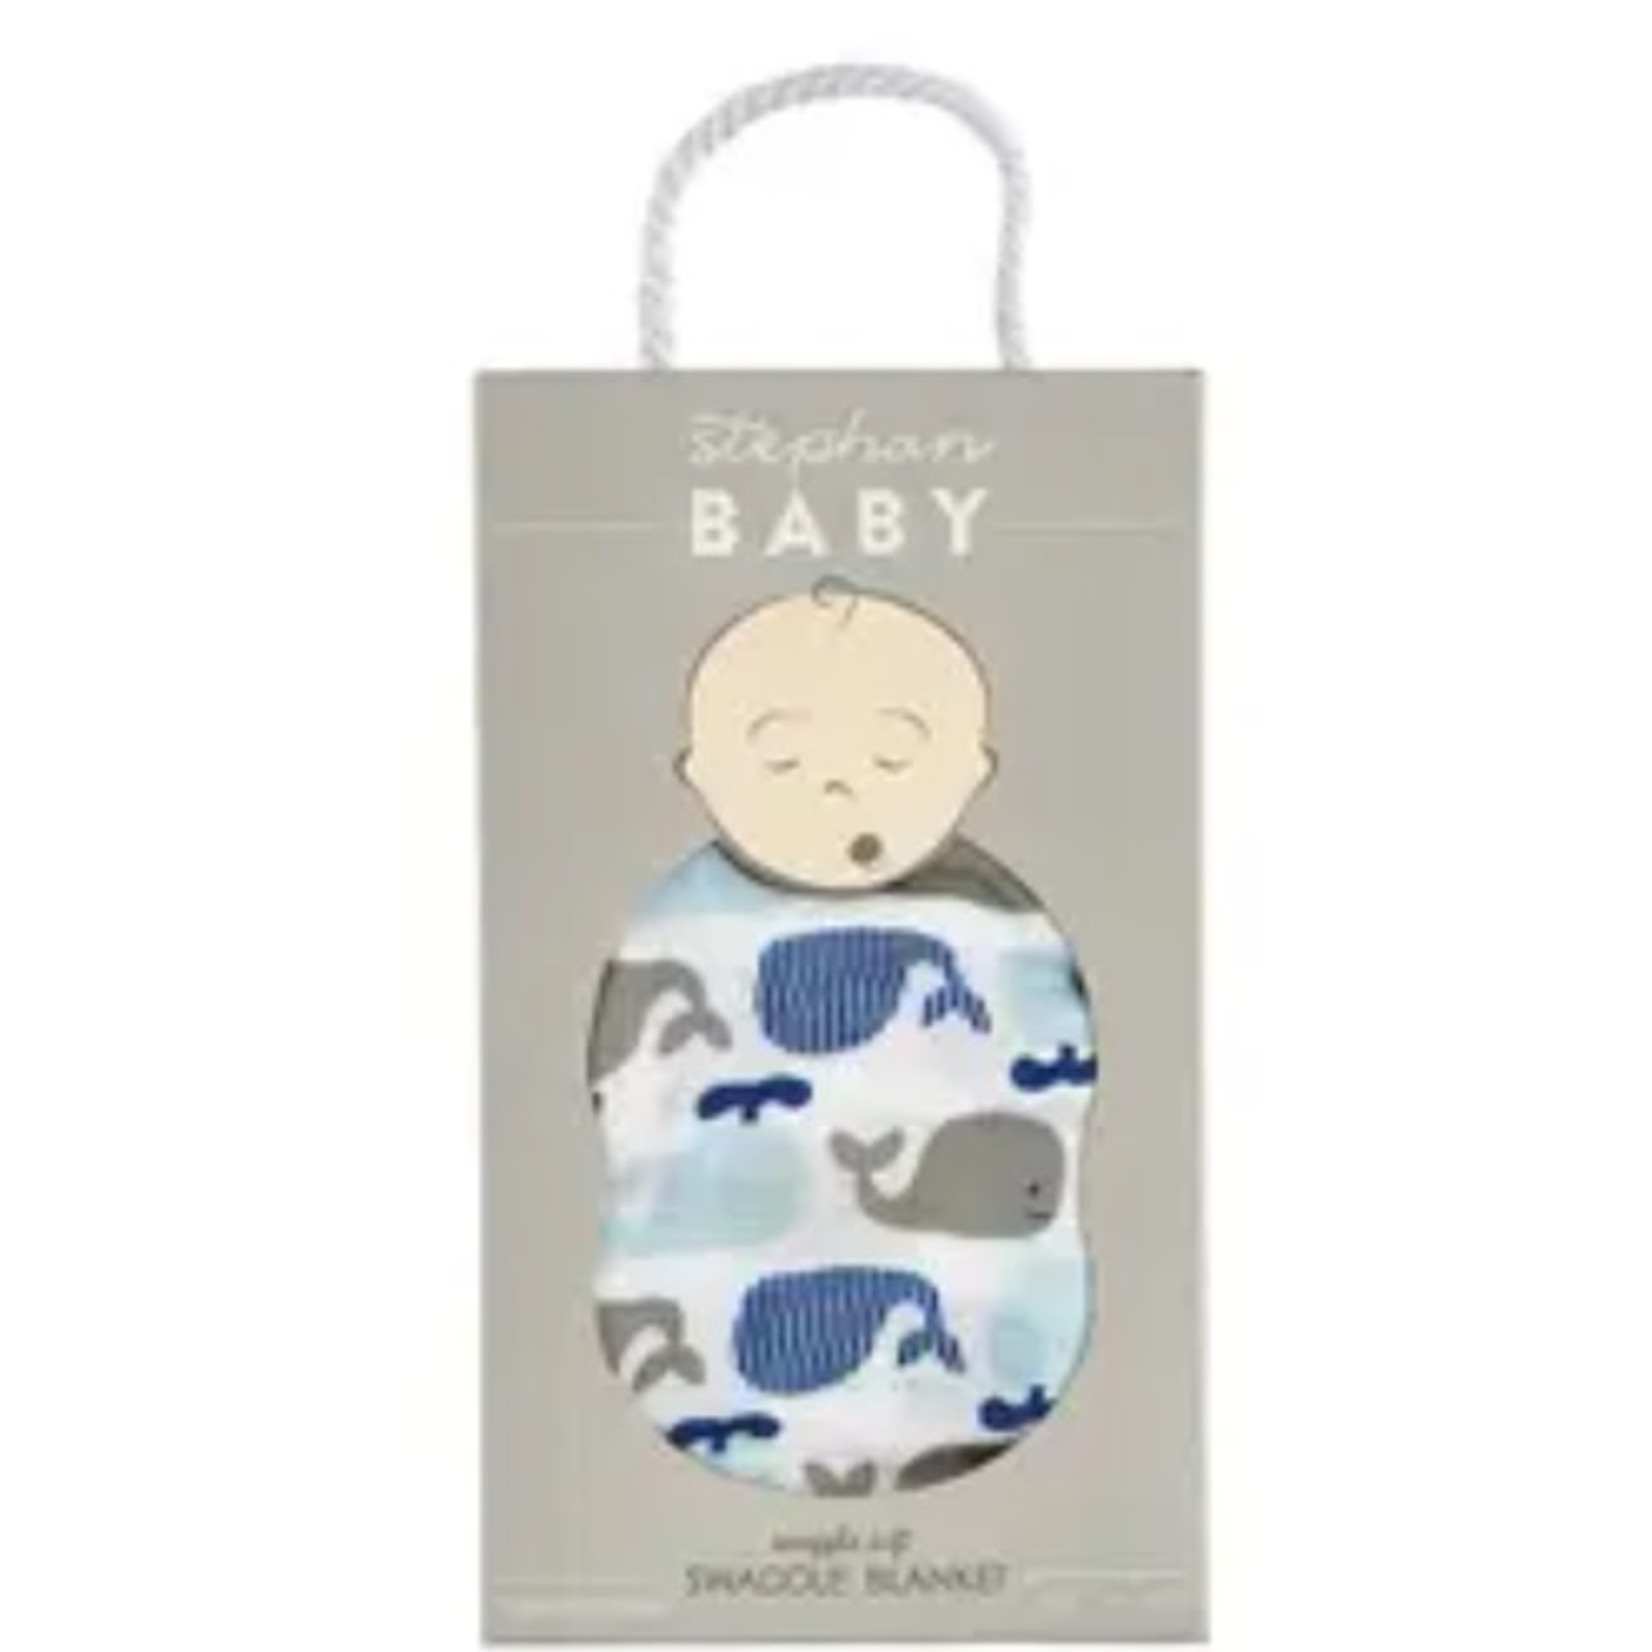 Bam Whale Swaddle Blanket